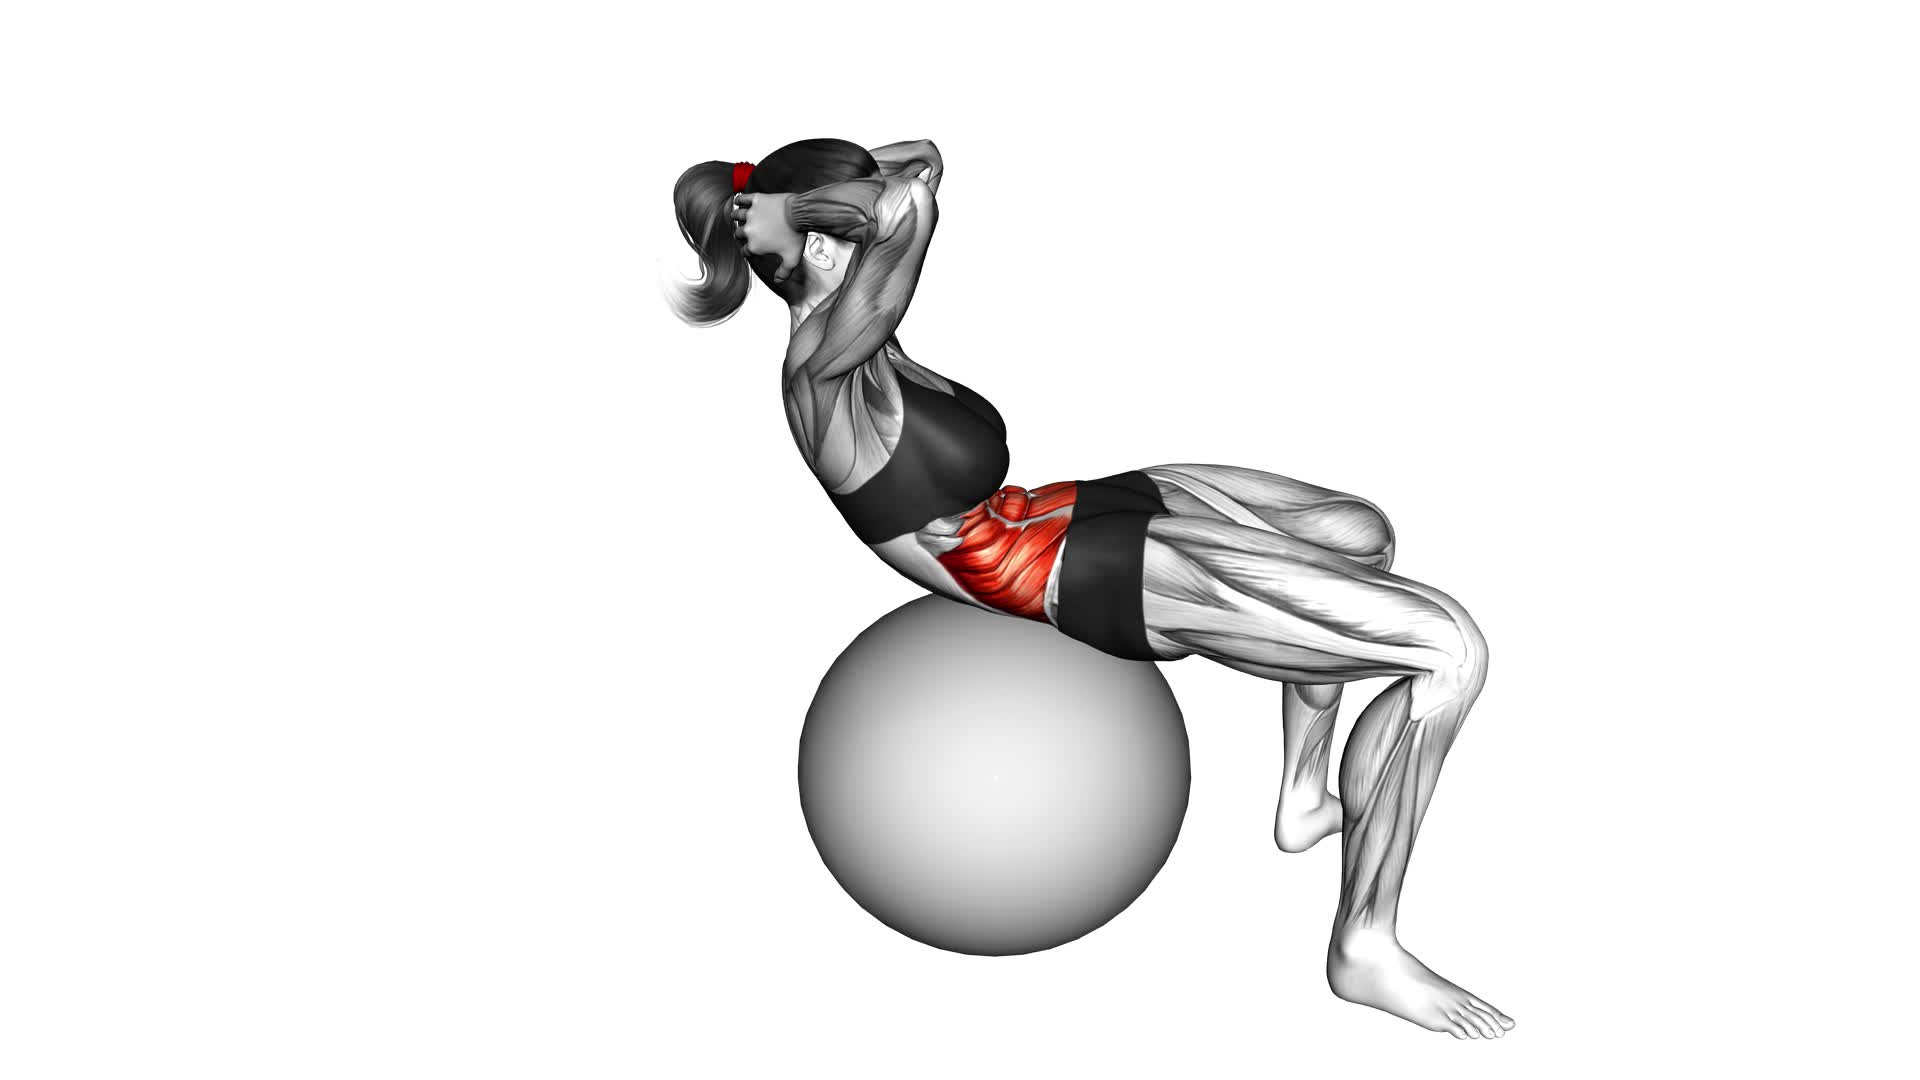 Crunch (On Stability Ball) (Female) - Video Exercise Guide & Tips